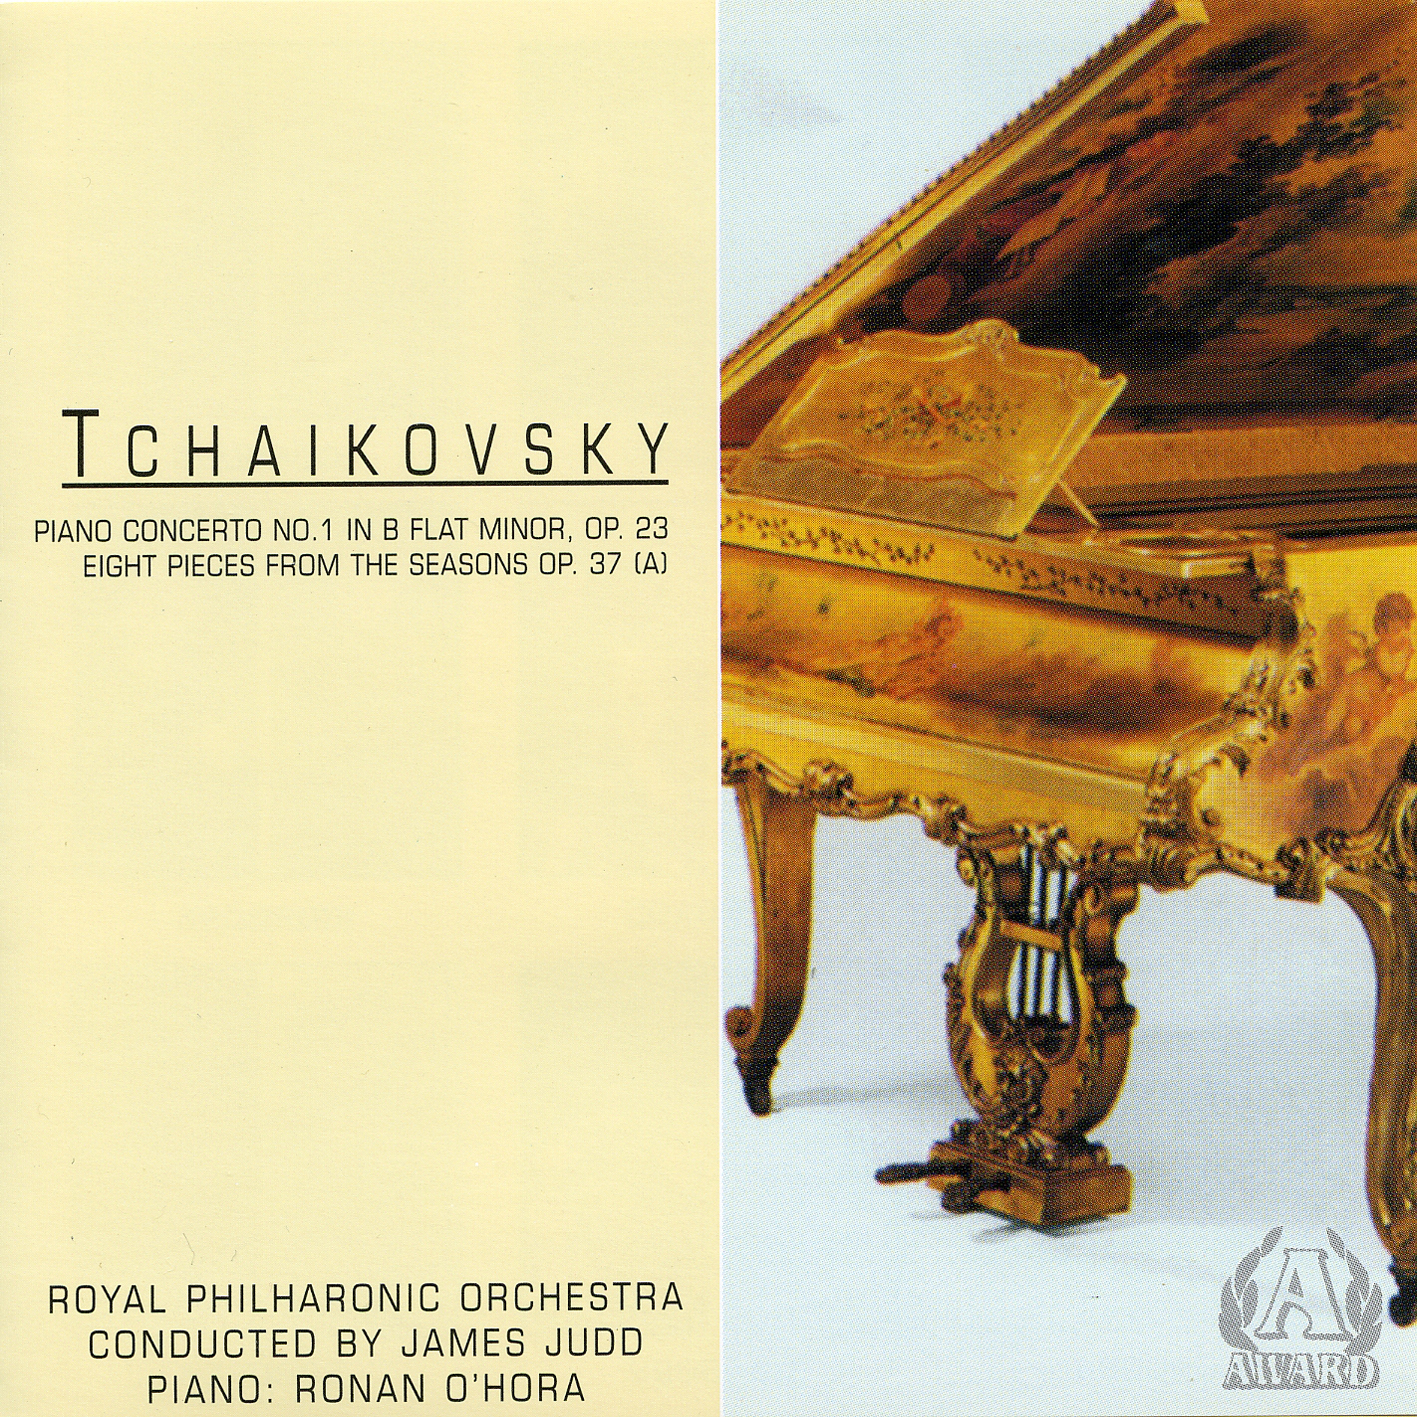 Tchaikovsky - Piano Concerto No. 1 in B Flat Minor, Op. 23 - Eight Pieces from The Seasons Op. 37 (a)